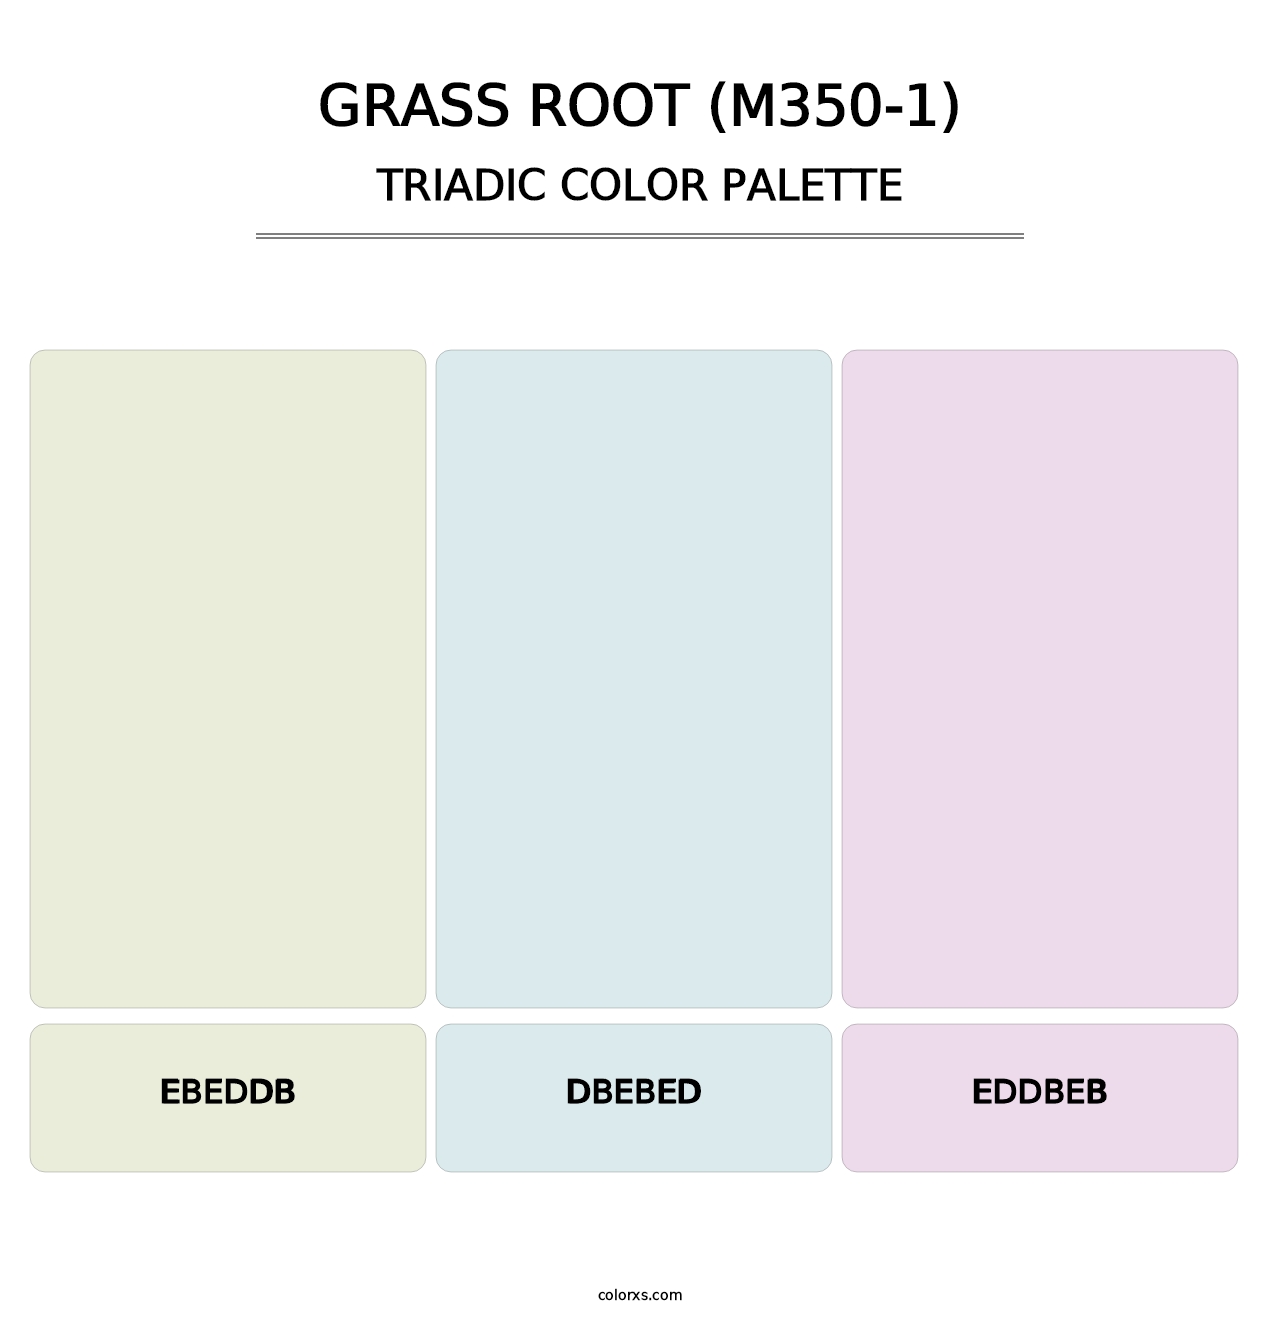 Grass Root (M350-1) - Triadic Color Palette